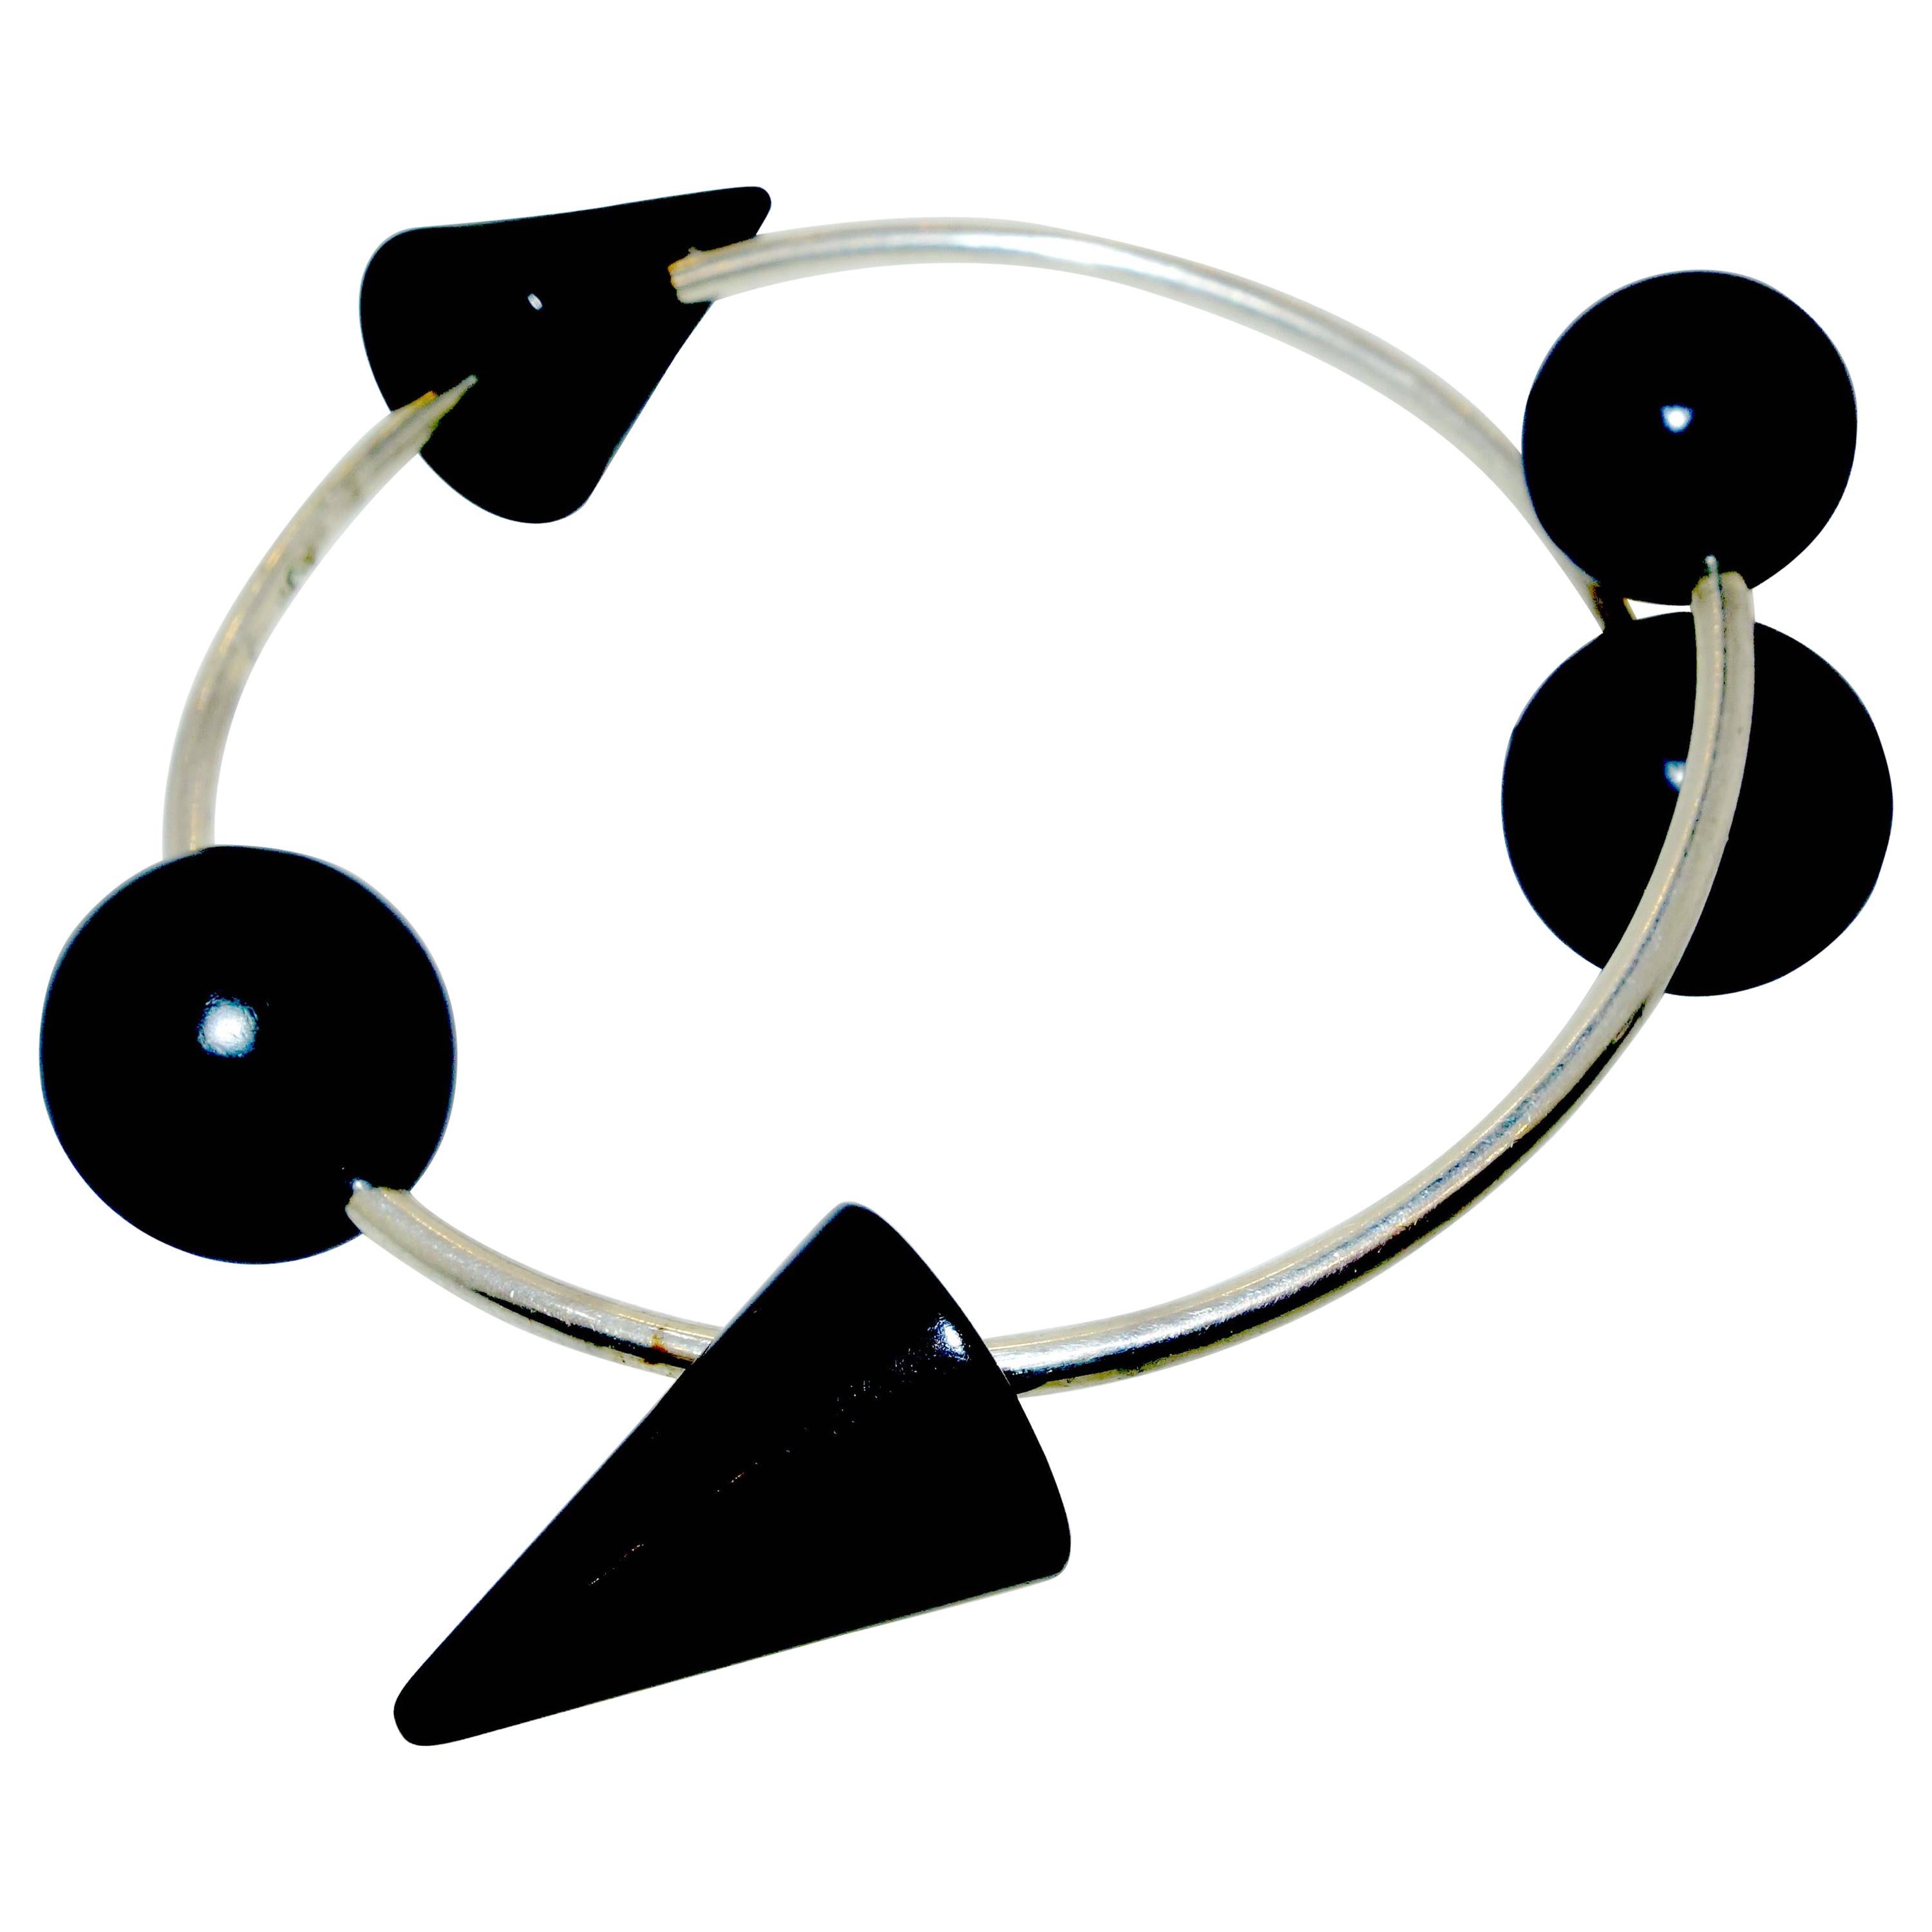 Bangle with a geometric design with black ceramic decorative elements (element's directions can be changed), set along a narrow tube of polished steel to create quite an unusual design. It expands slightly for ease of putting on. In excellent